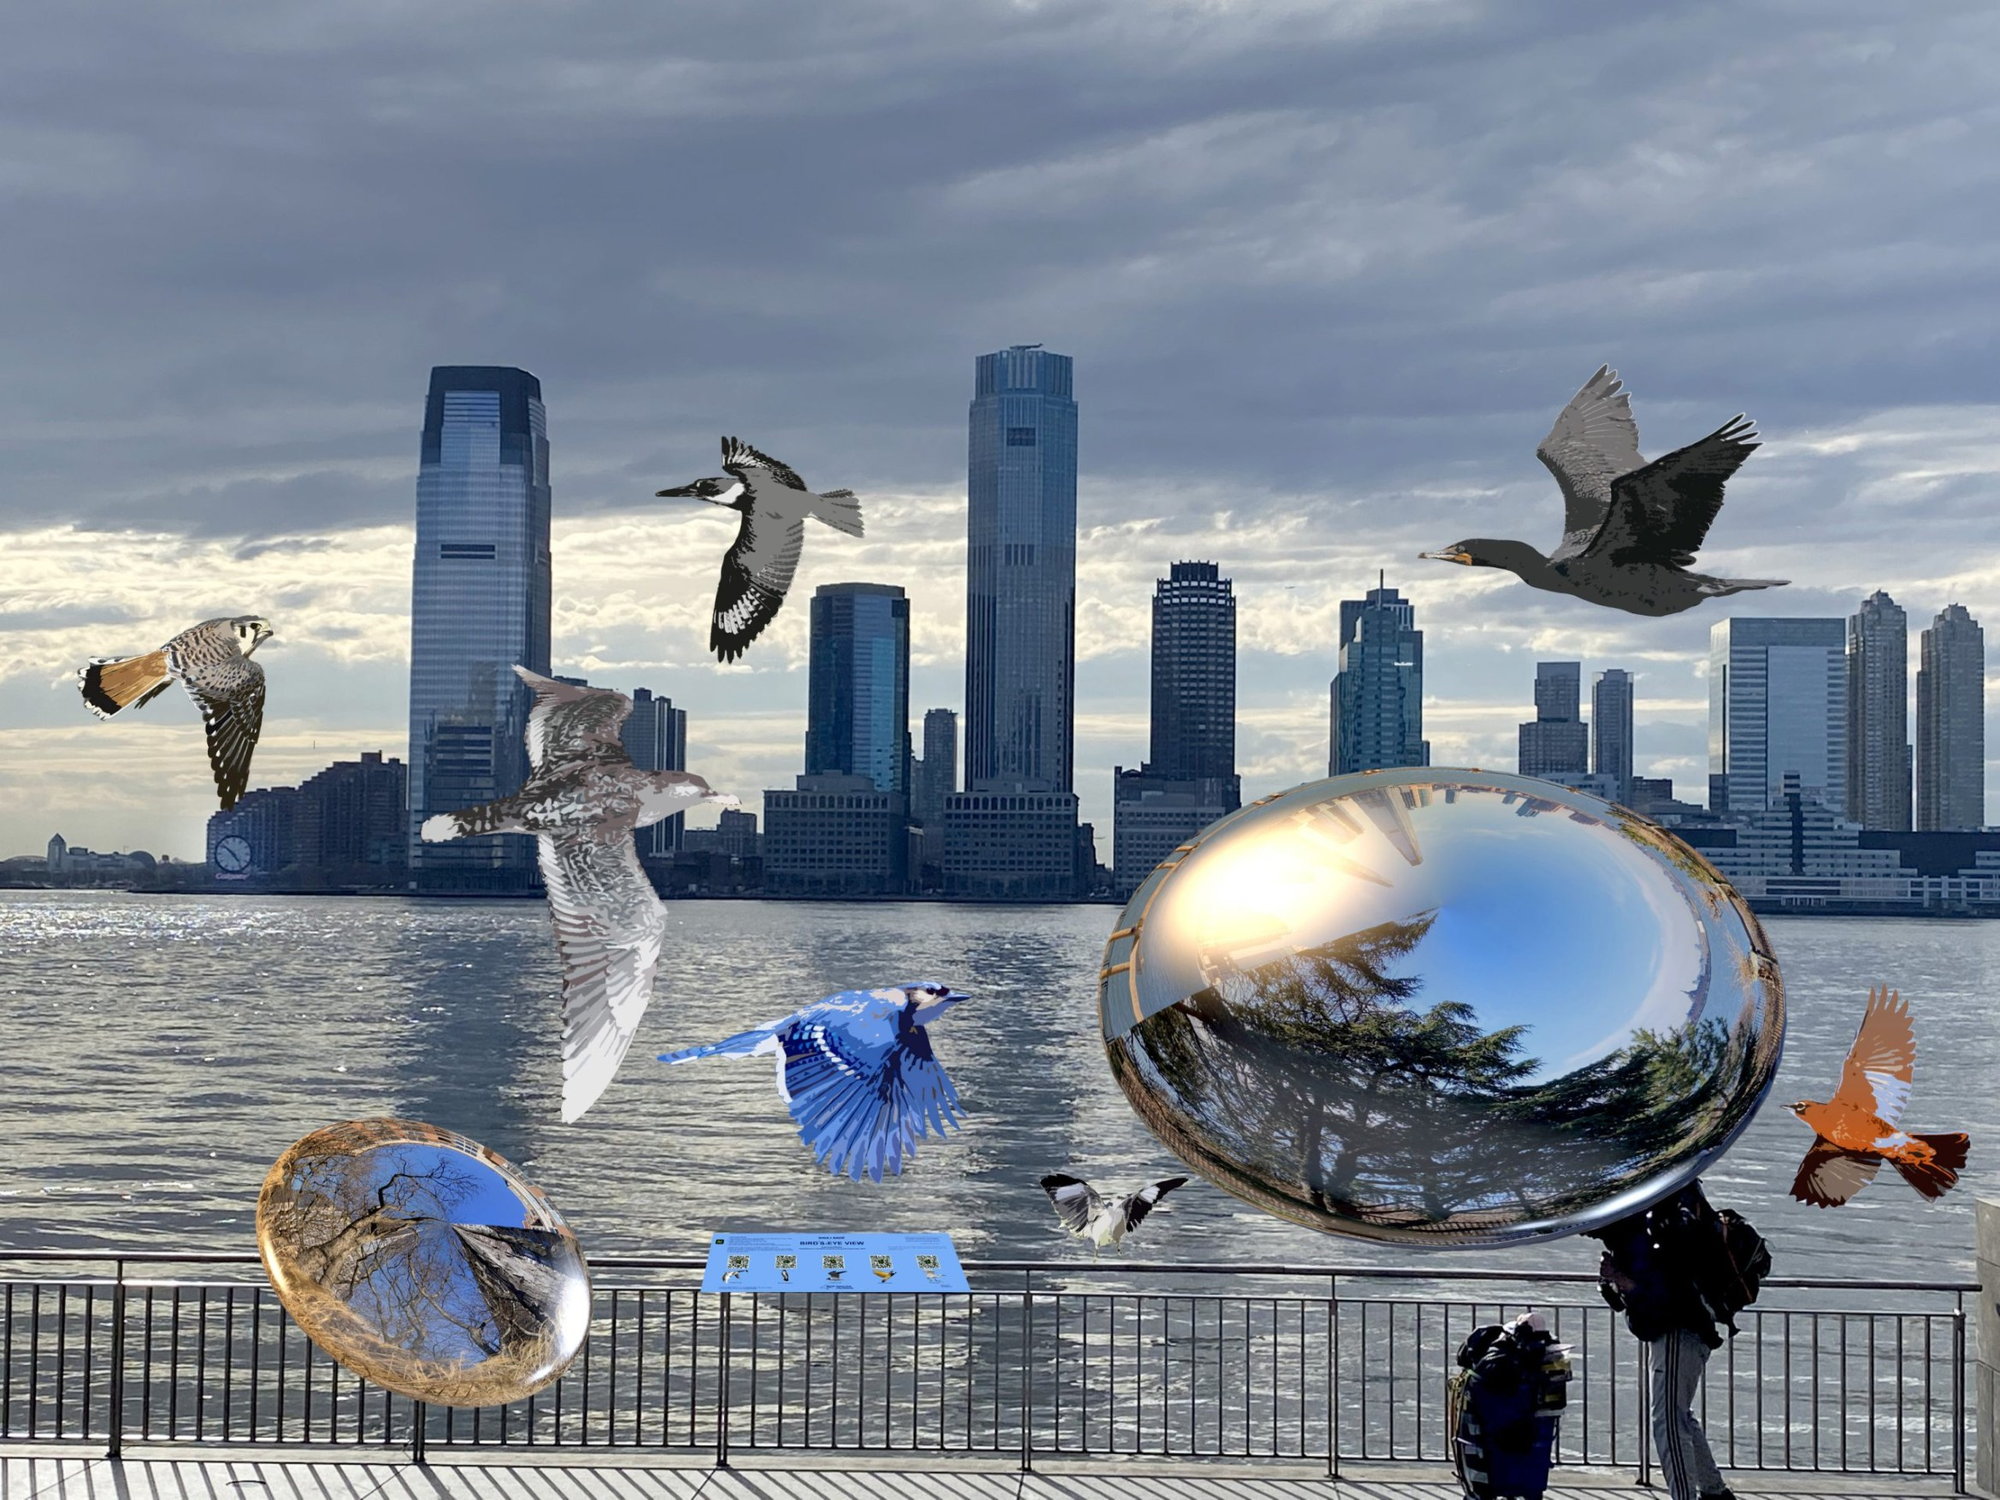 Several species of native NYC birds and abstract images float by as part of Battery Park City